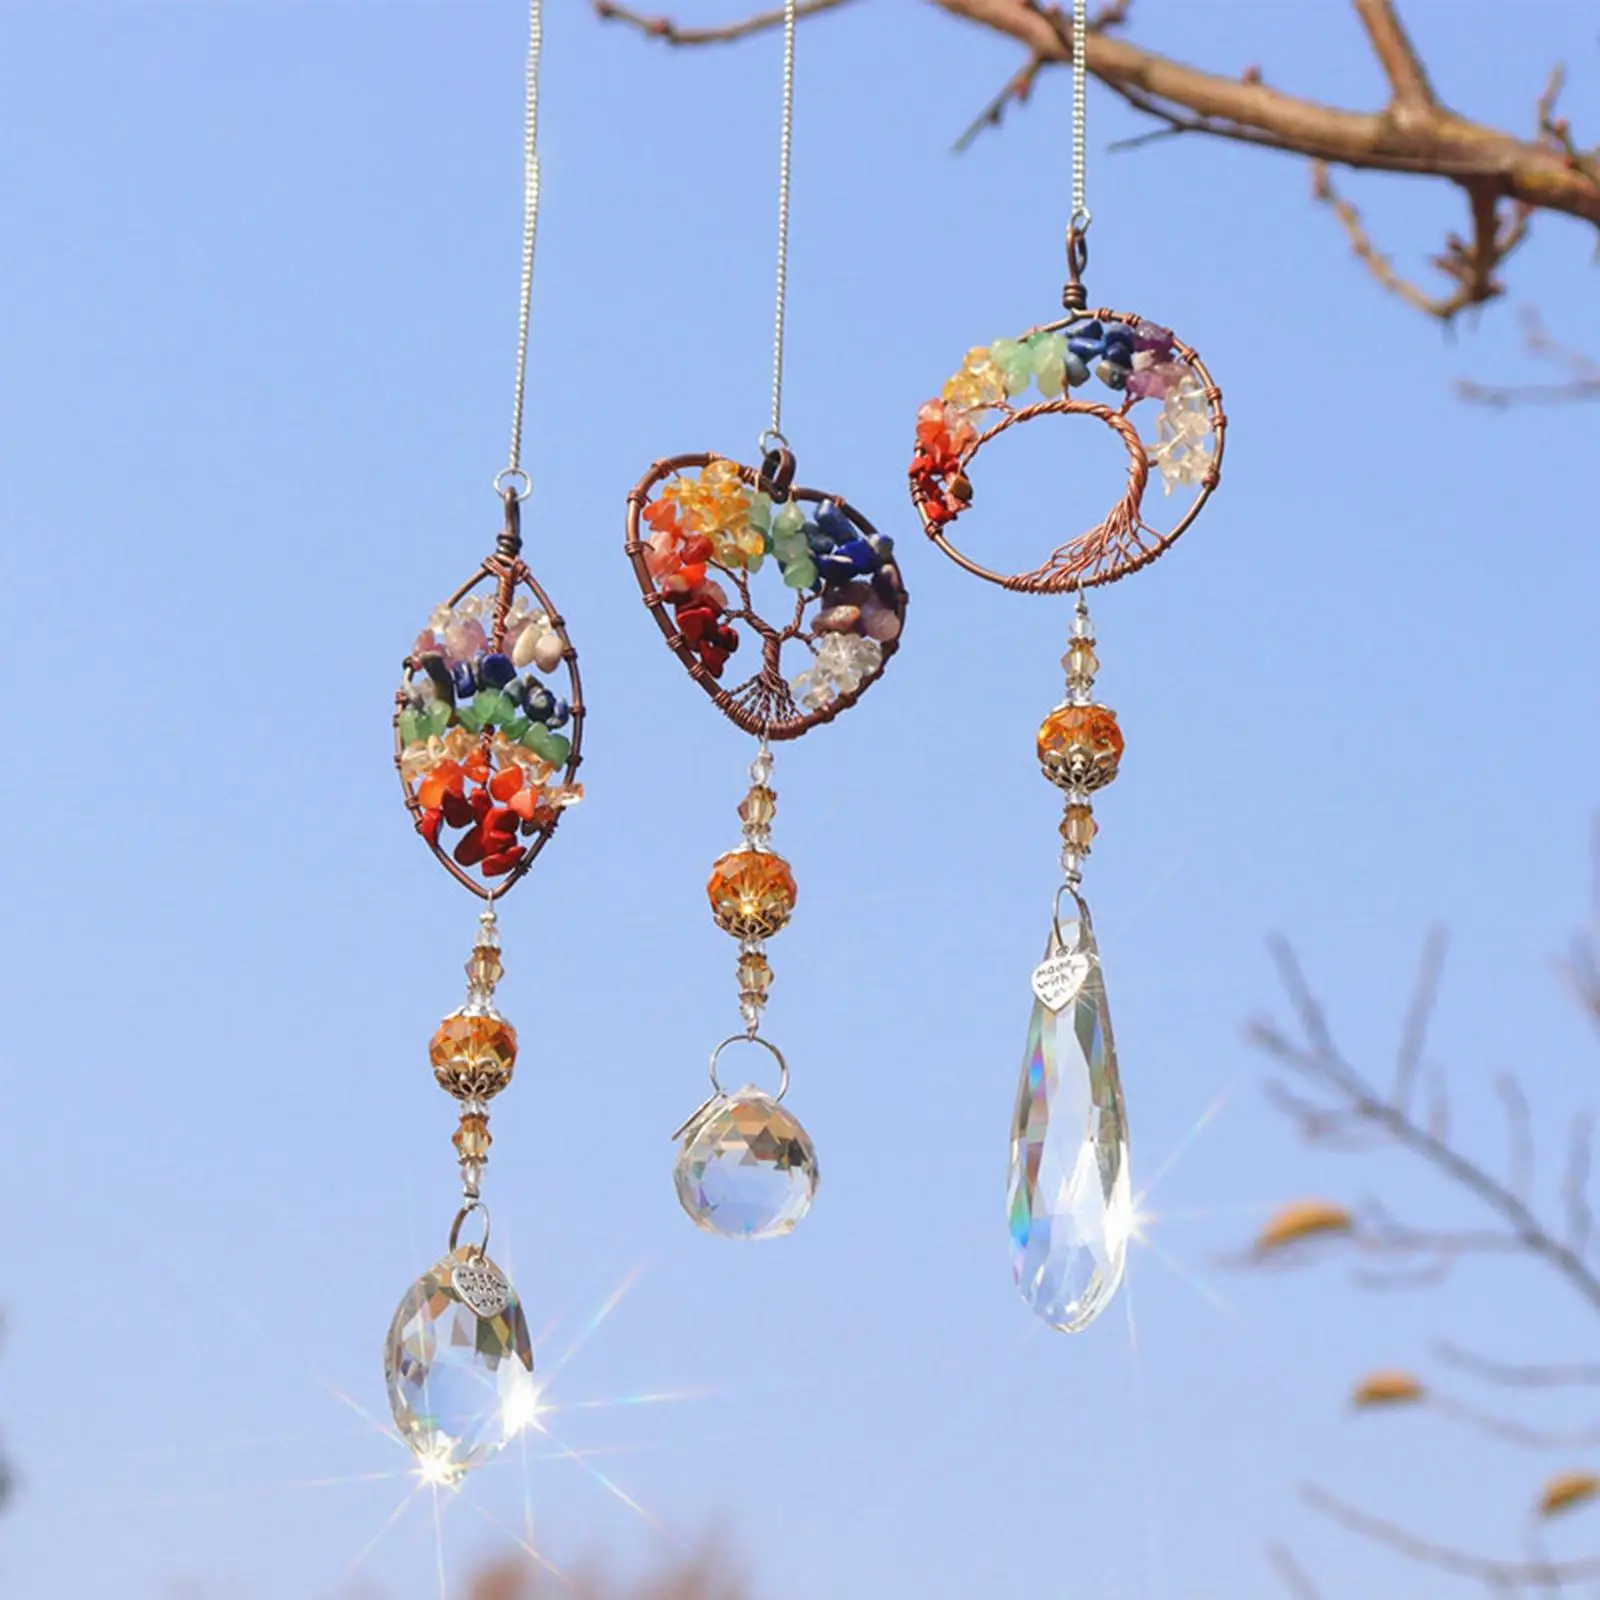 Crystals Hanging Ornament Prisms Wind Chime for Window Indoor Outdoor Decor